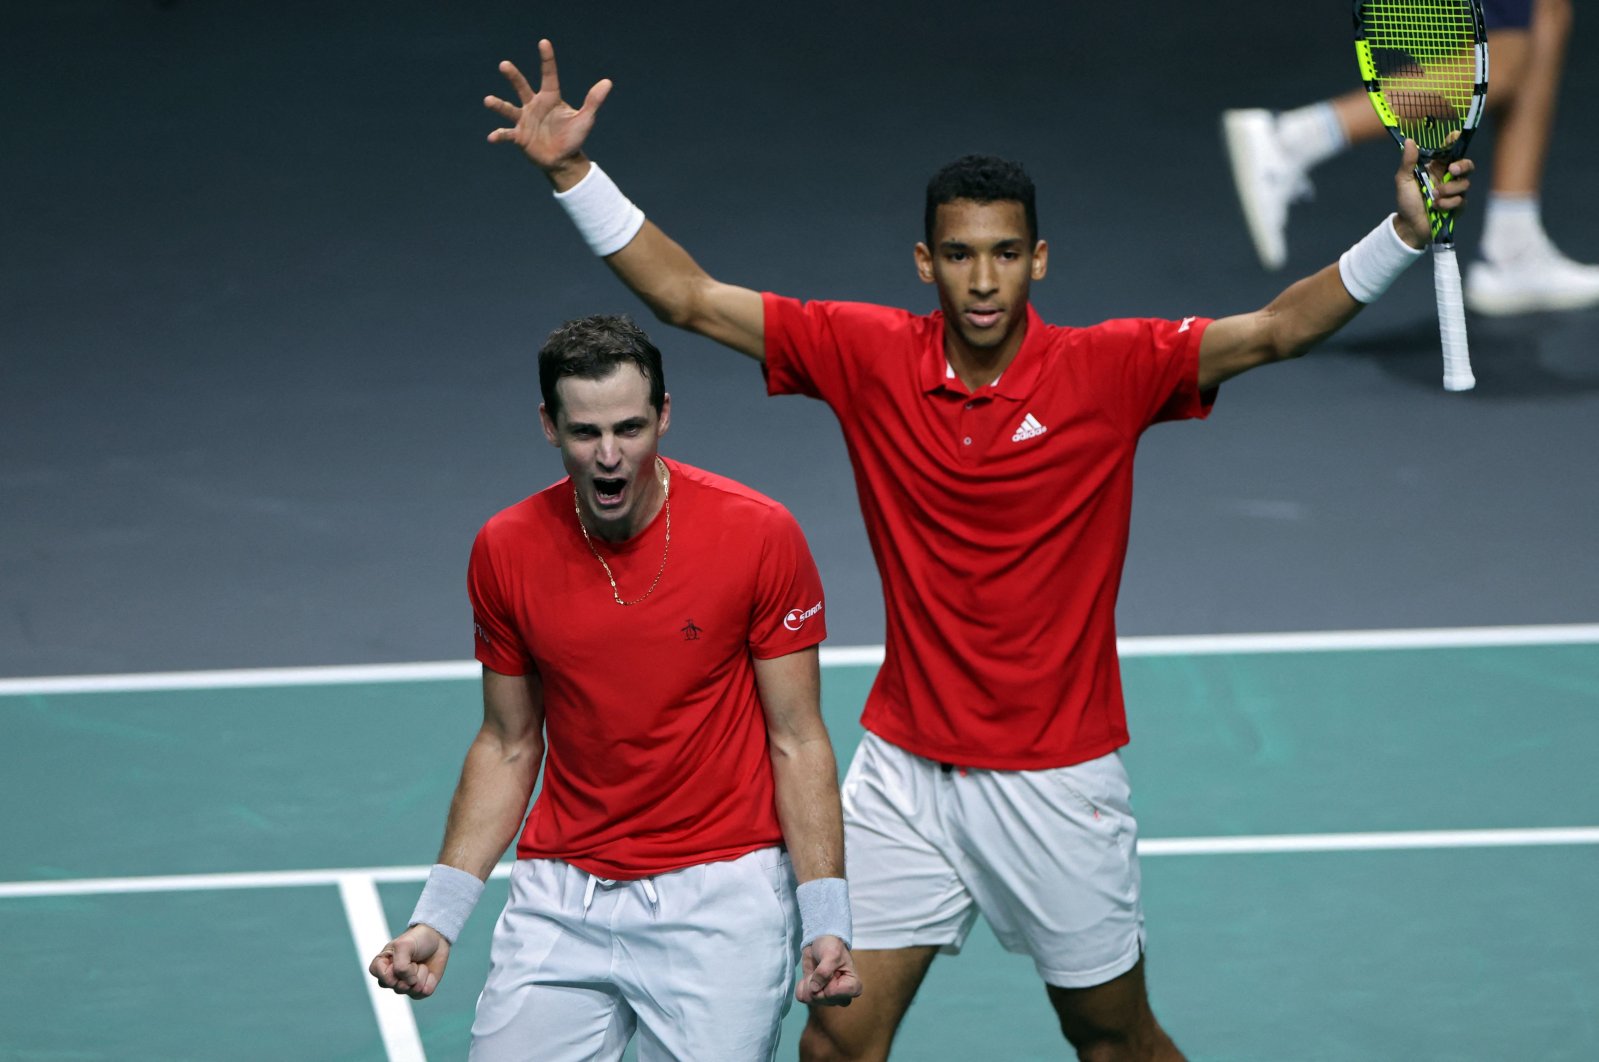 Canada Felix Auger-Aliassime (R) and Vasek Pospisil celebrate after winning the men&#039;s double semi-final tennis of the Davis Cup tennis tournament match between Italy and Canada at the Martin Carpena sportshall, Malaga, Spain, Nov. 26, 2022. (AFP Photo)